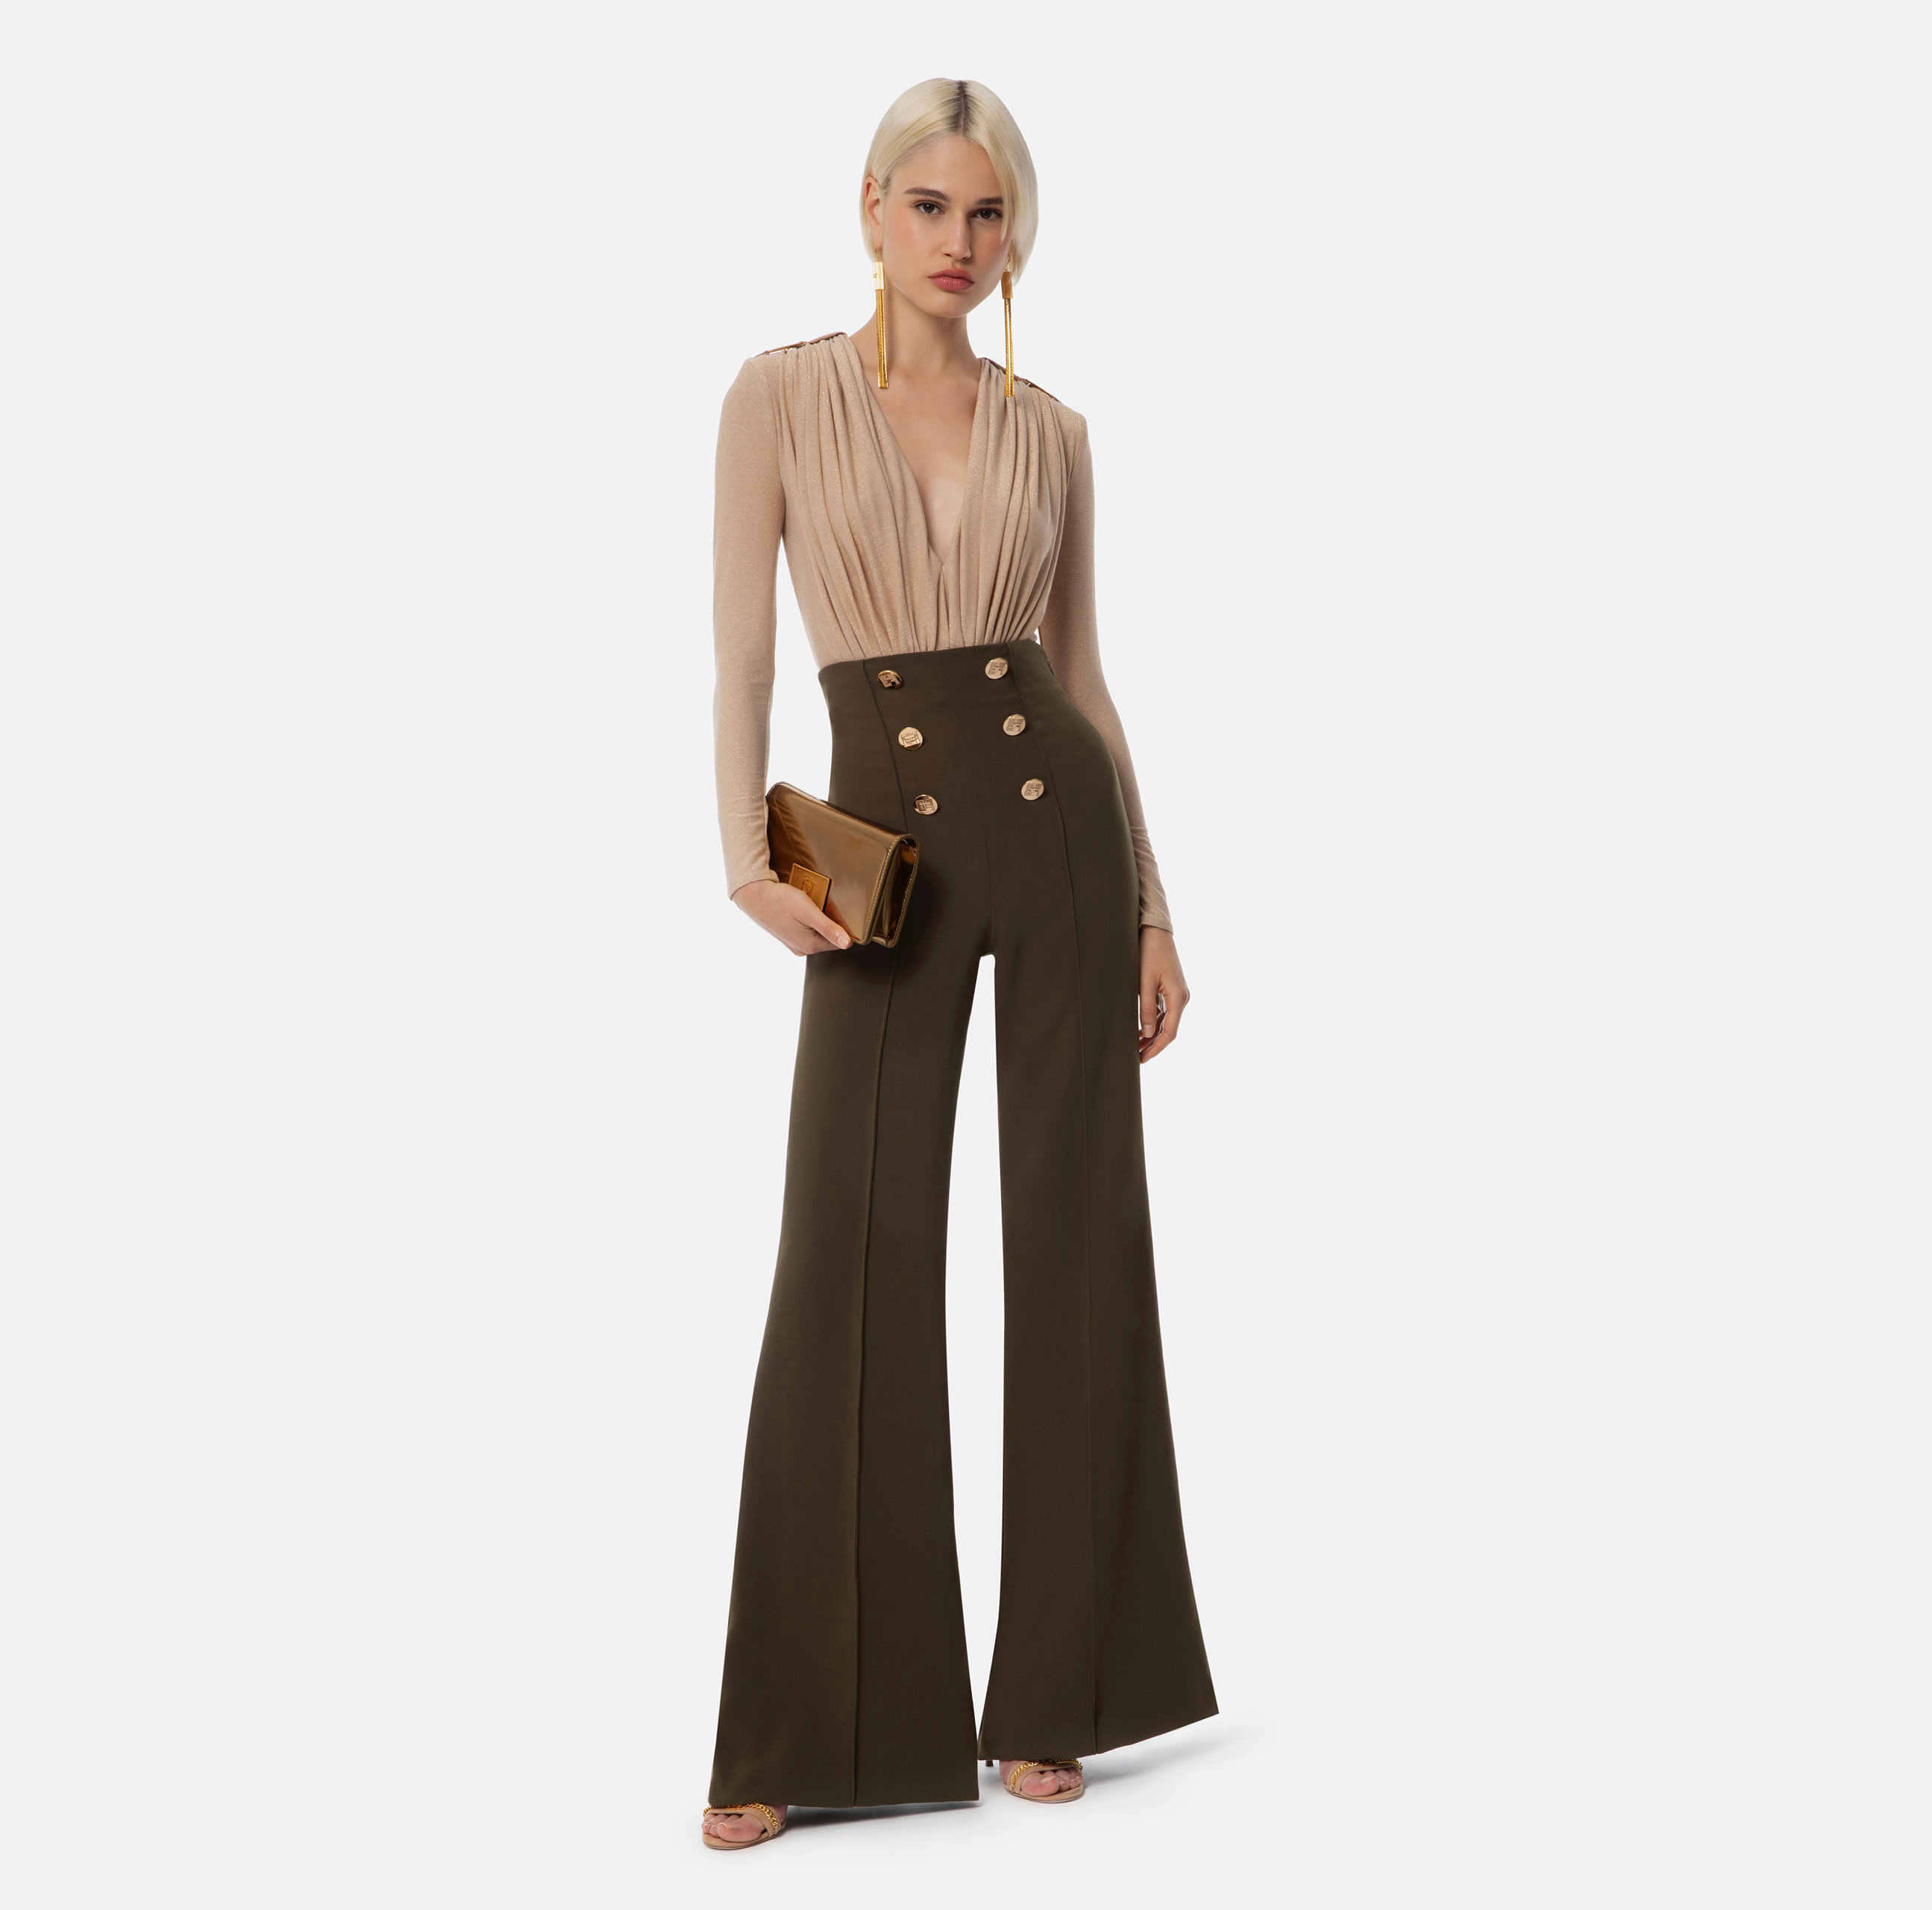 Buy Brown Palazzo Pant Cotton for Best Price, Reviews, Free Shipping